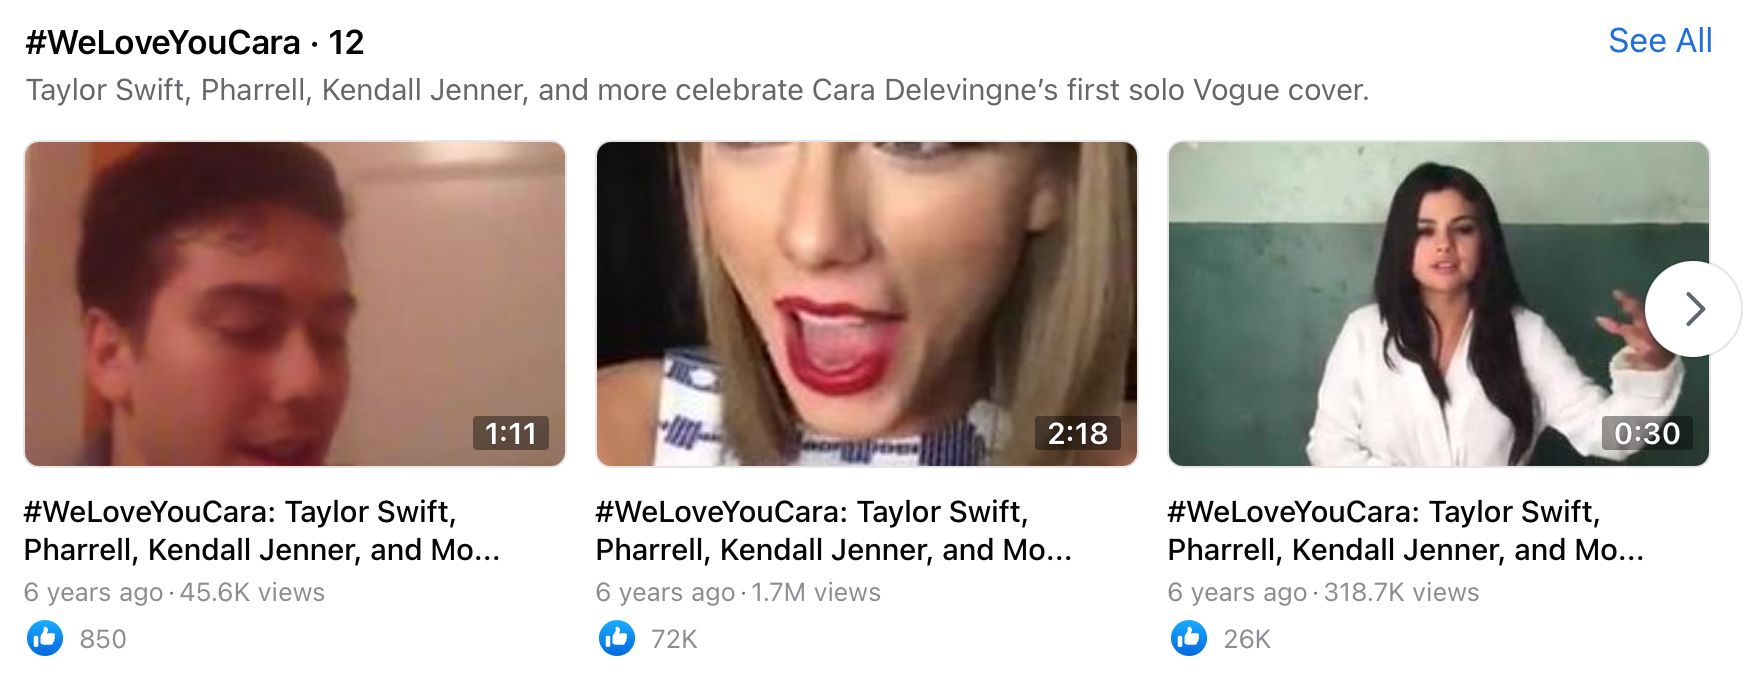 Facebook video playlist for the hashtag ‘#WeLoveYouCara’ by @Vogue